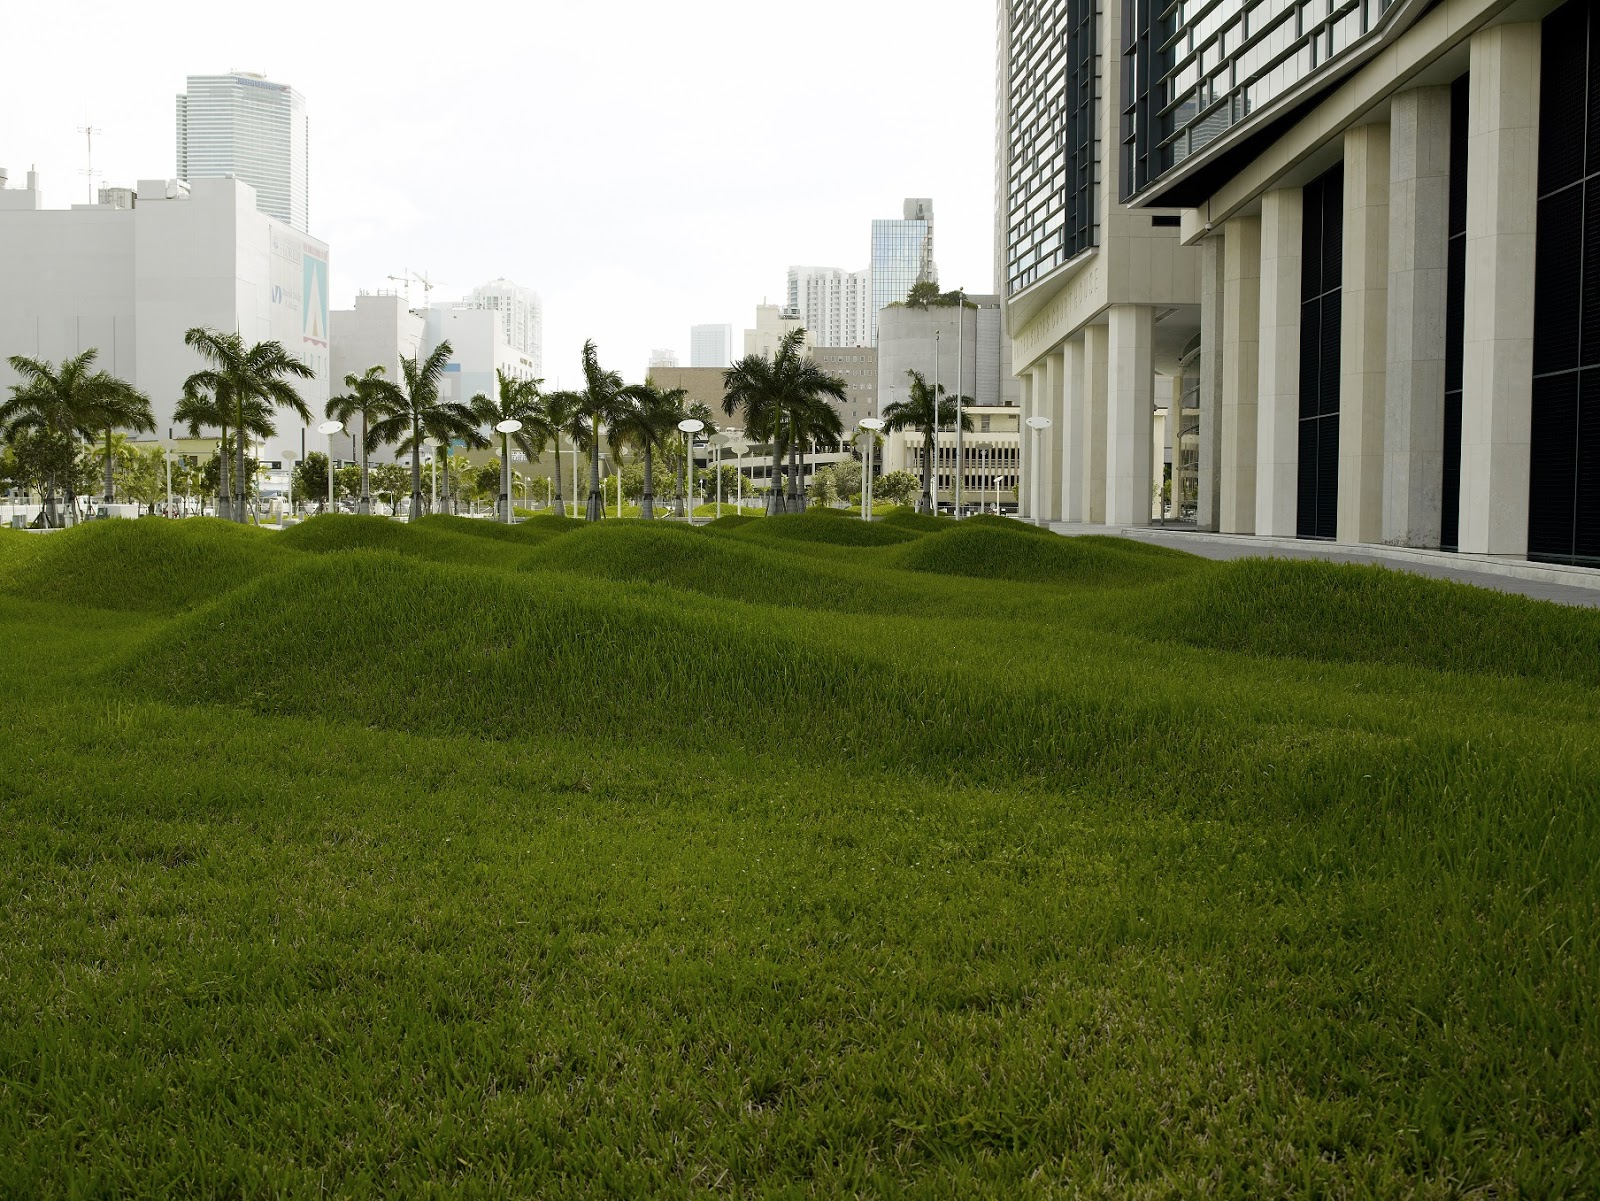 A landscape view of Flutter, by Maya Lin, showing a pair of sculpted lawns that mimic rippling water or sand.